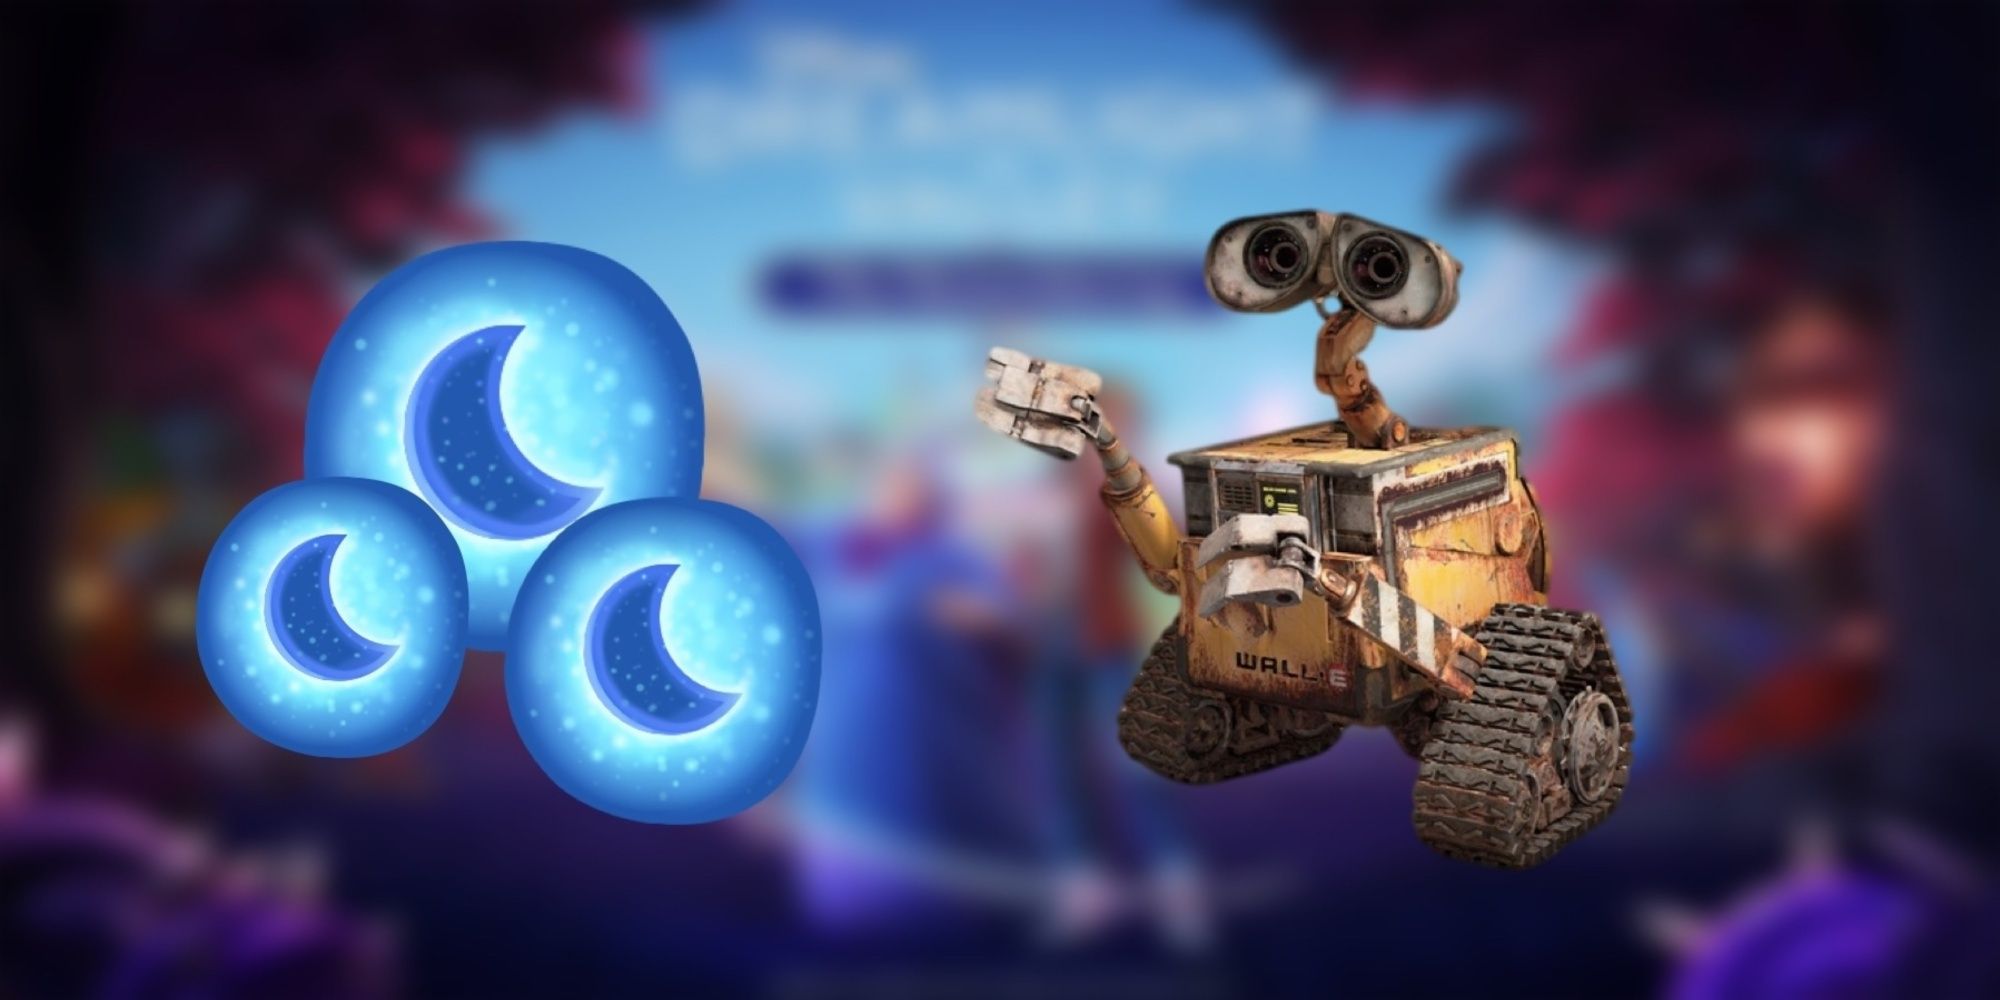 wall-e character and moonstones icon